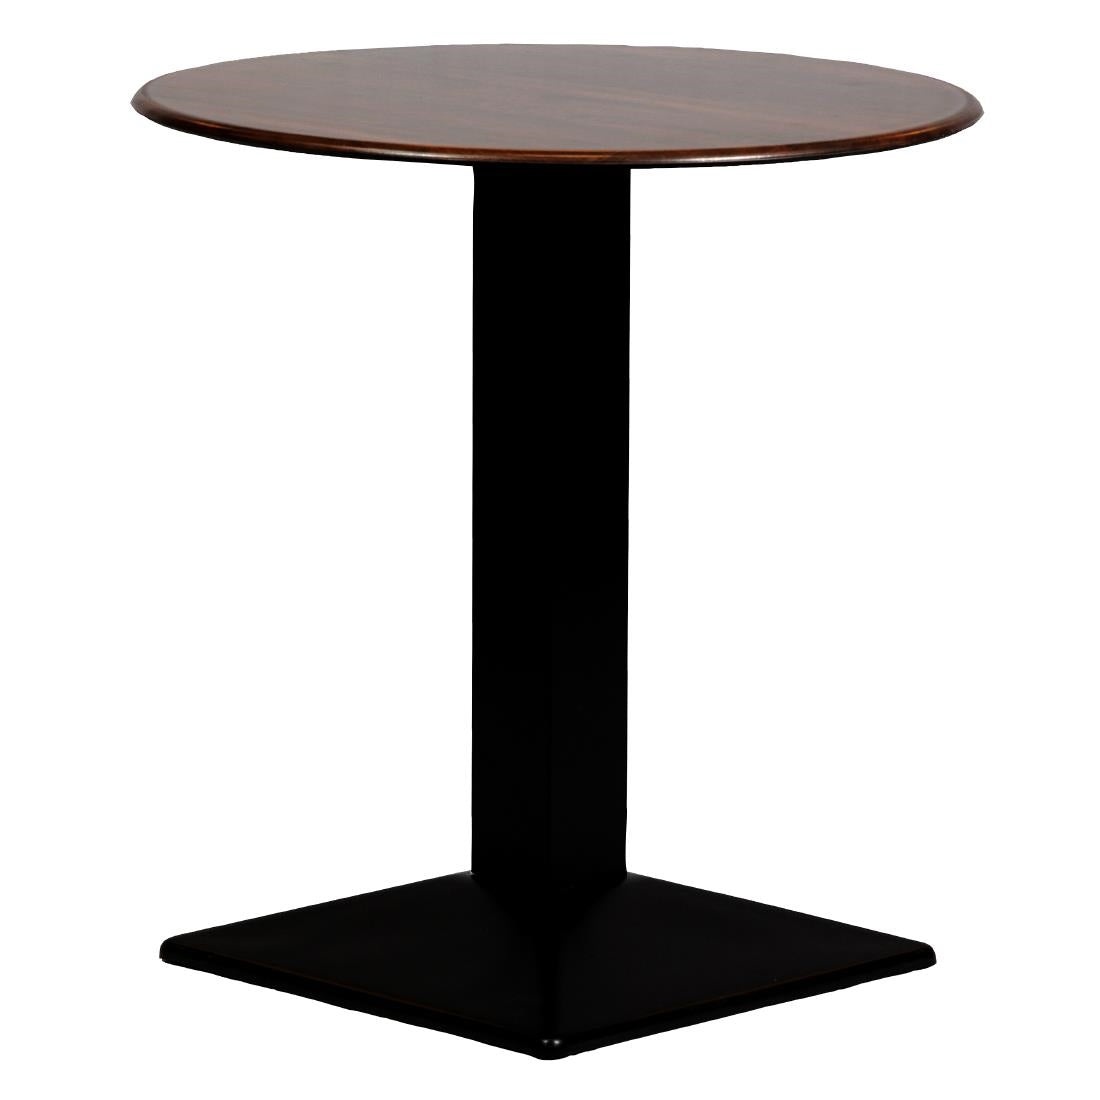 CZ821 Turin Metal Base Round Dining Table with Laminate Top Walnut 600mm JD Catering Equipment Solutions Ltd